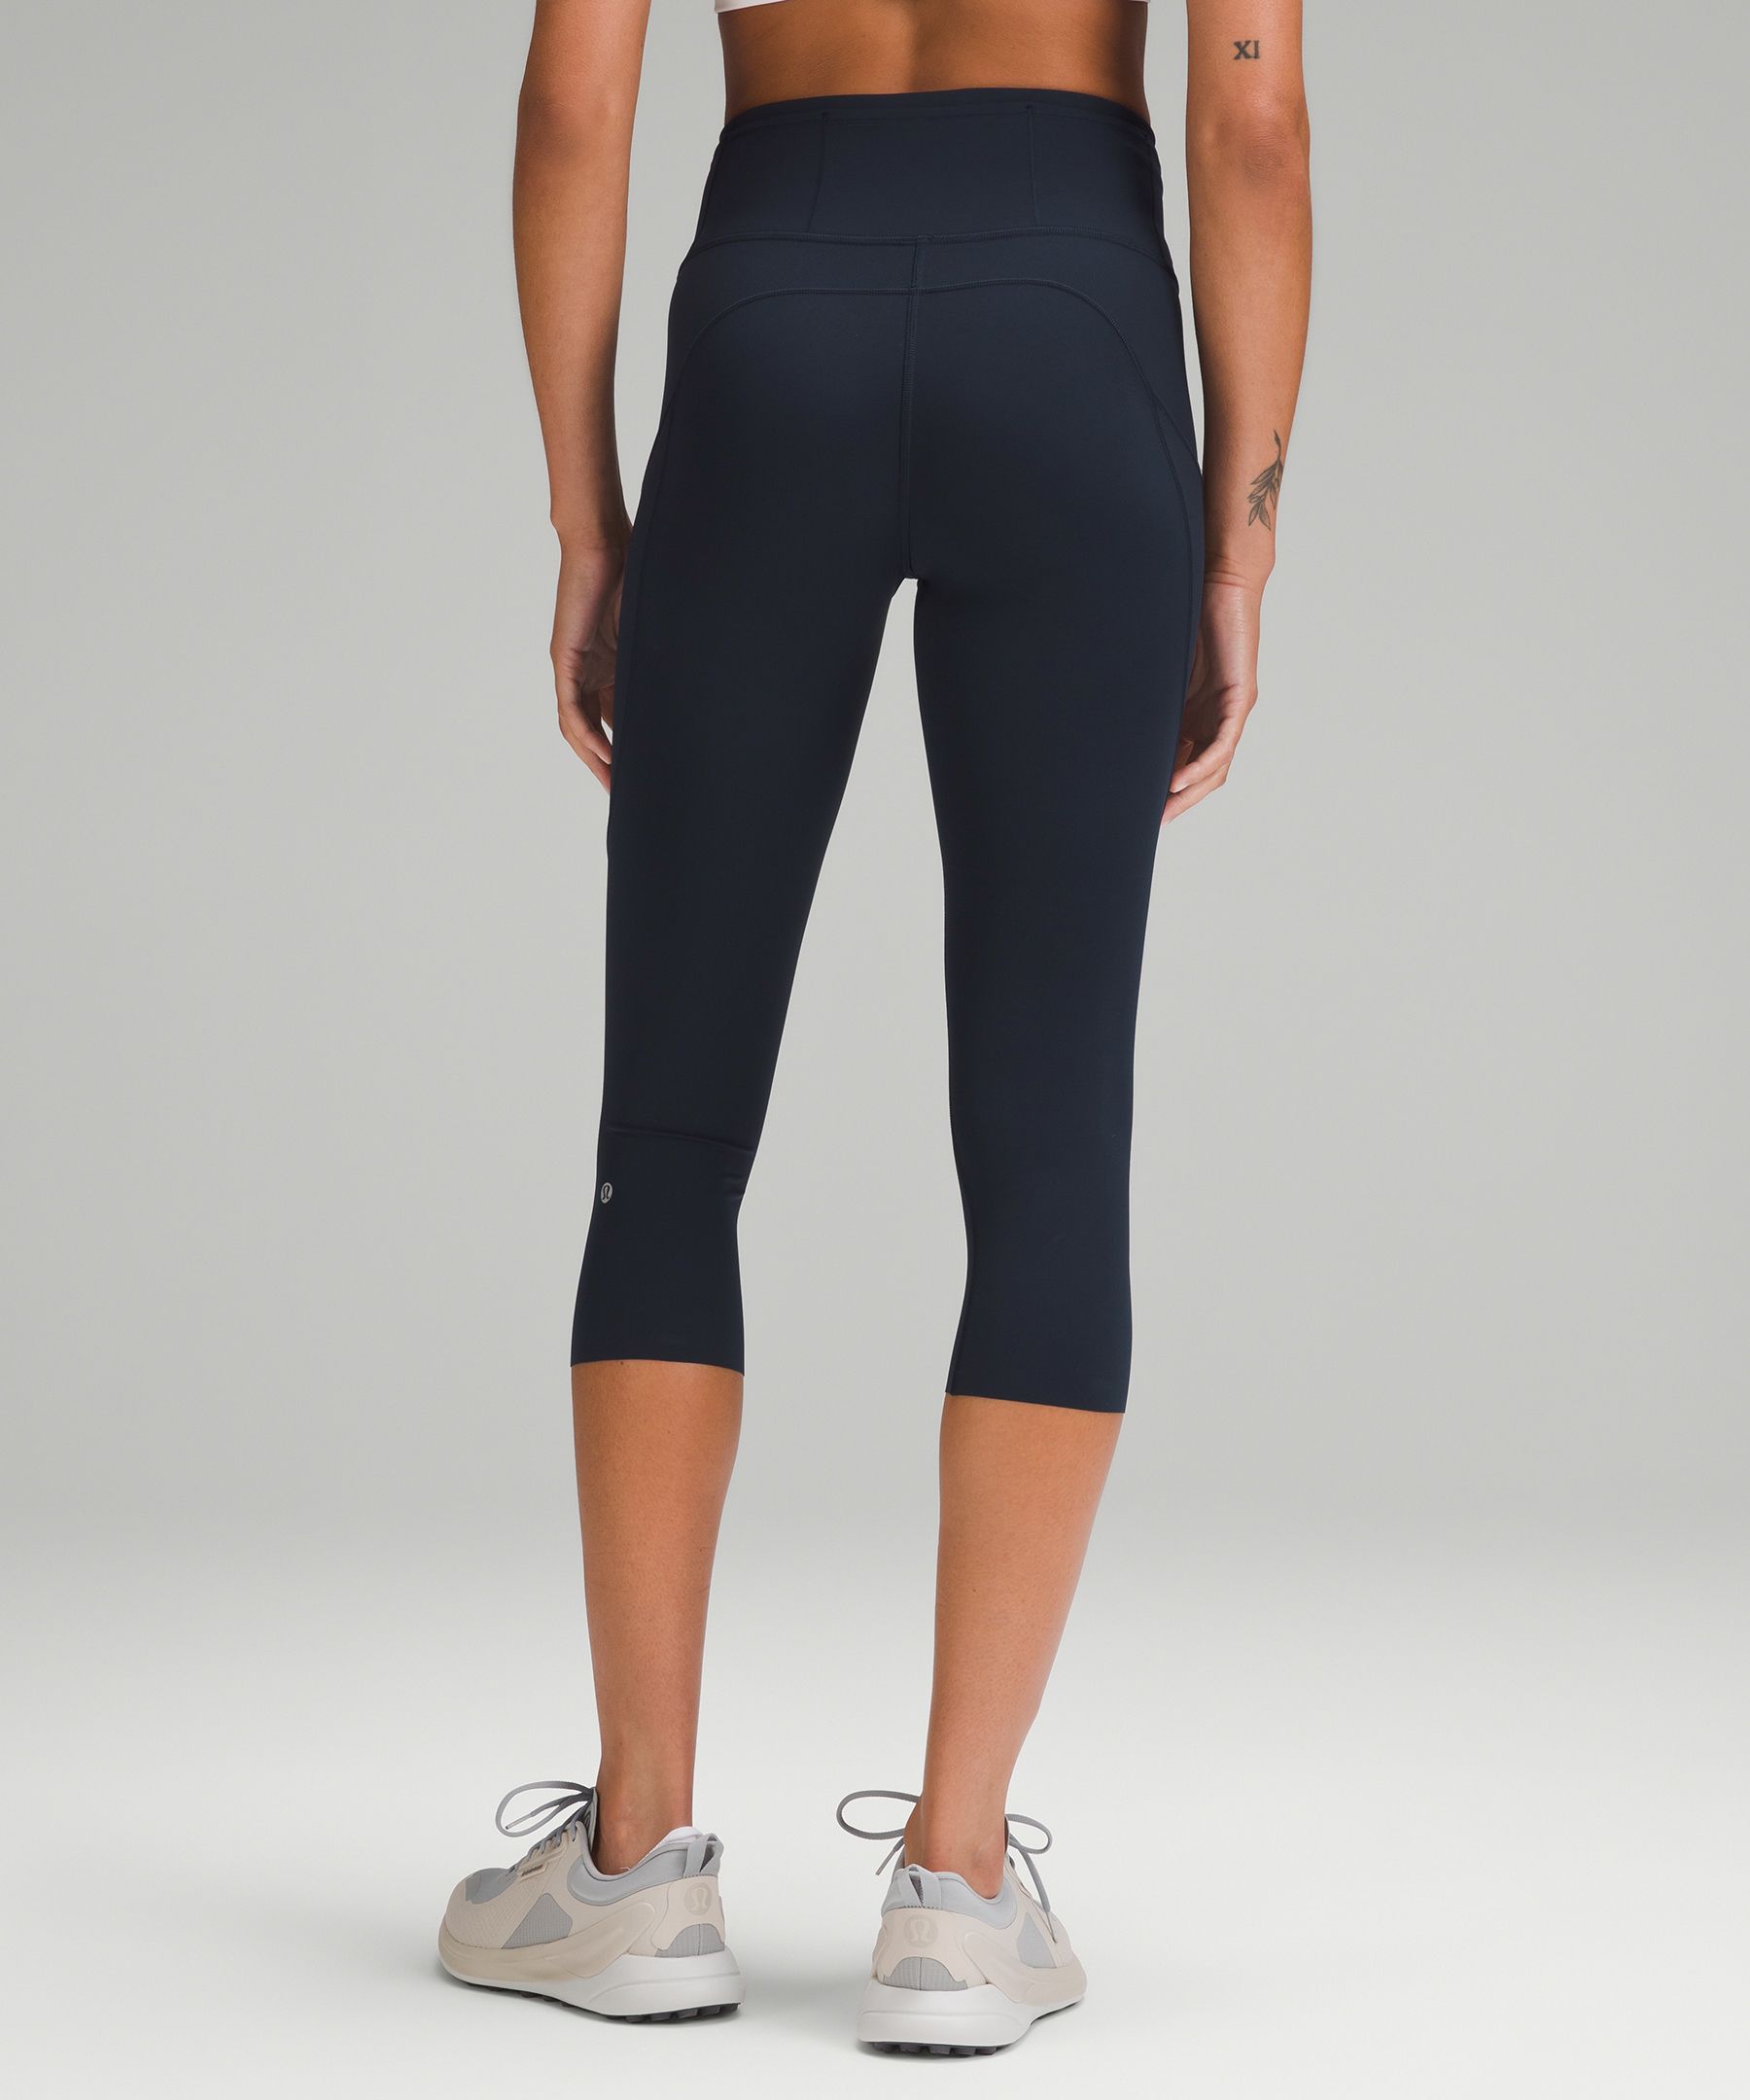 Fast and Free High-Rise Crop 19, Women's Capris